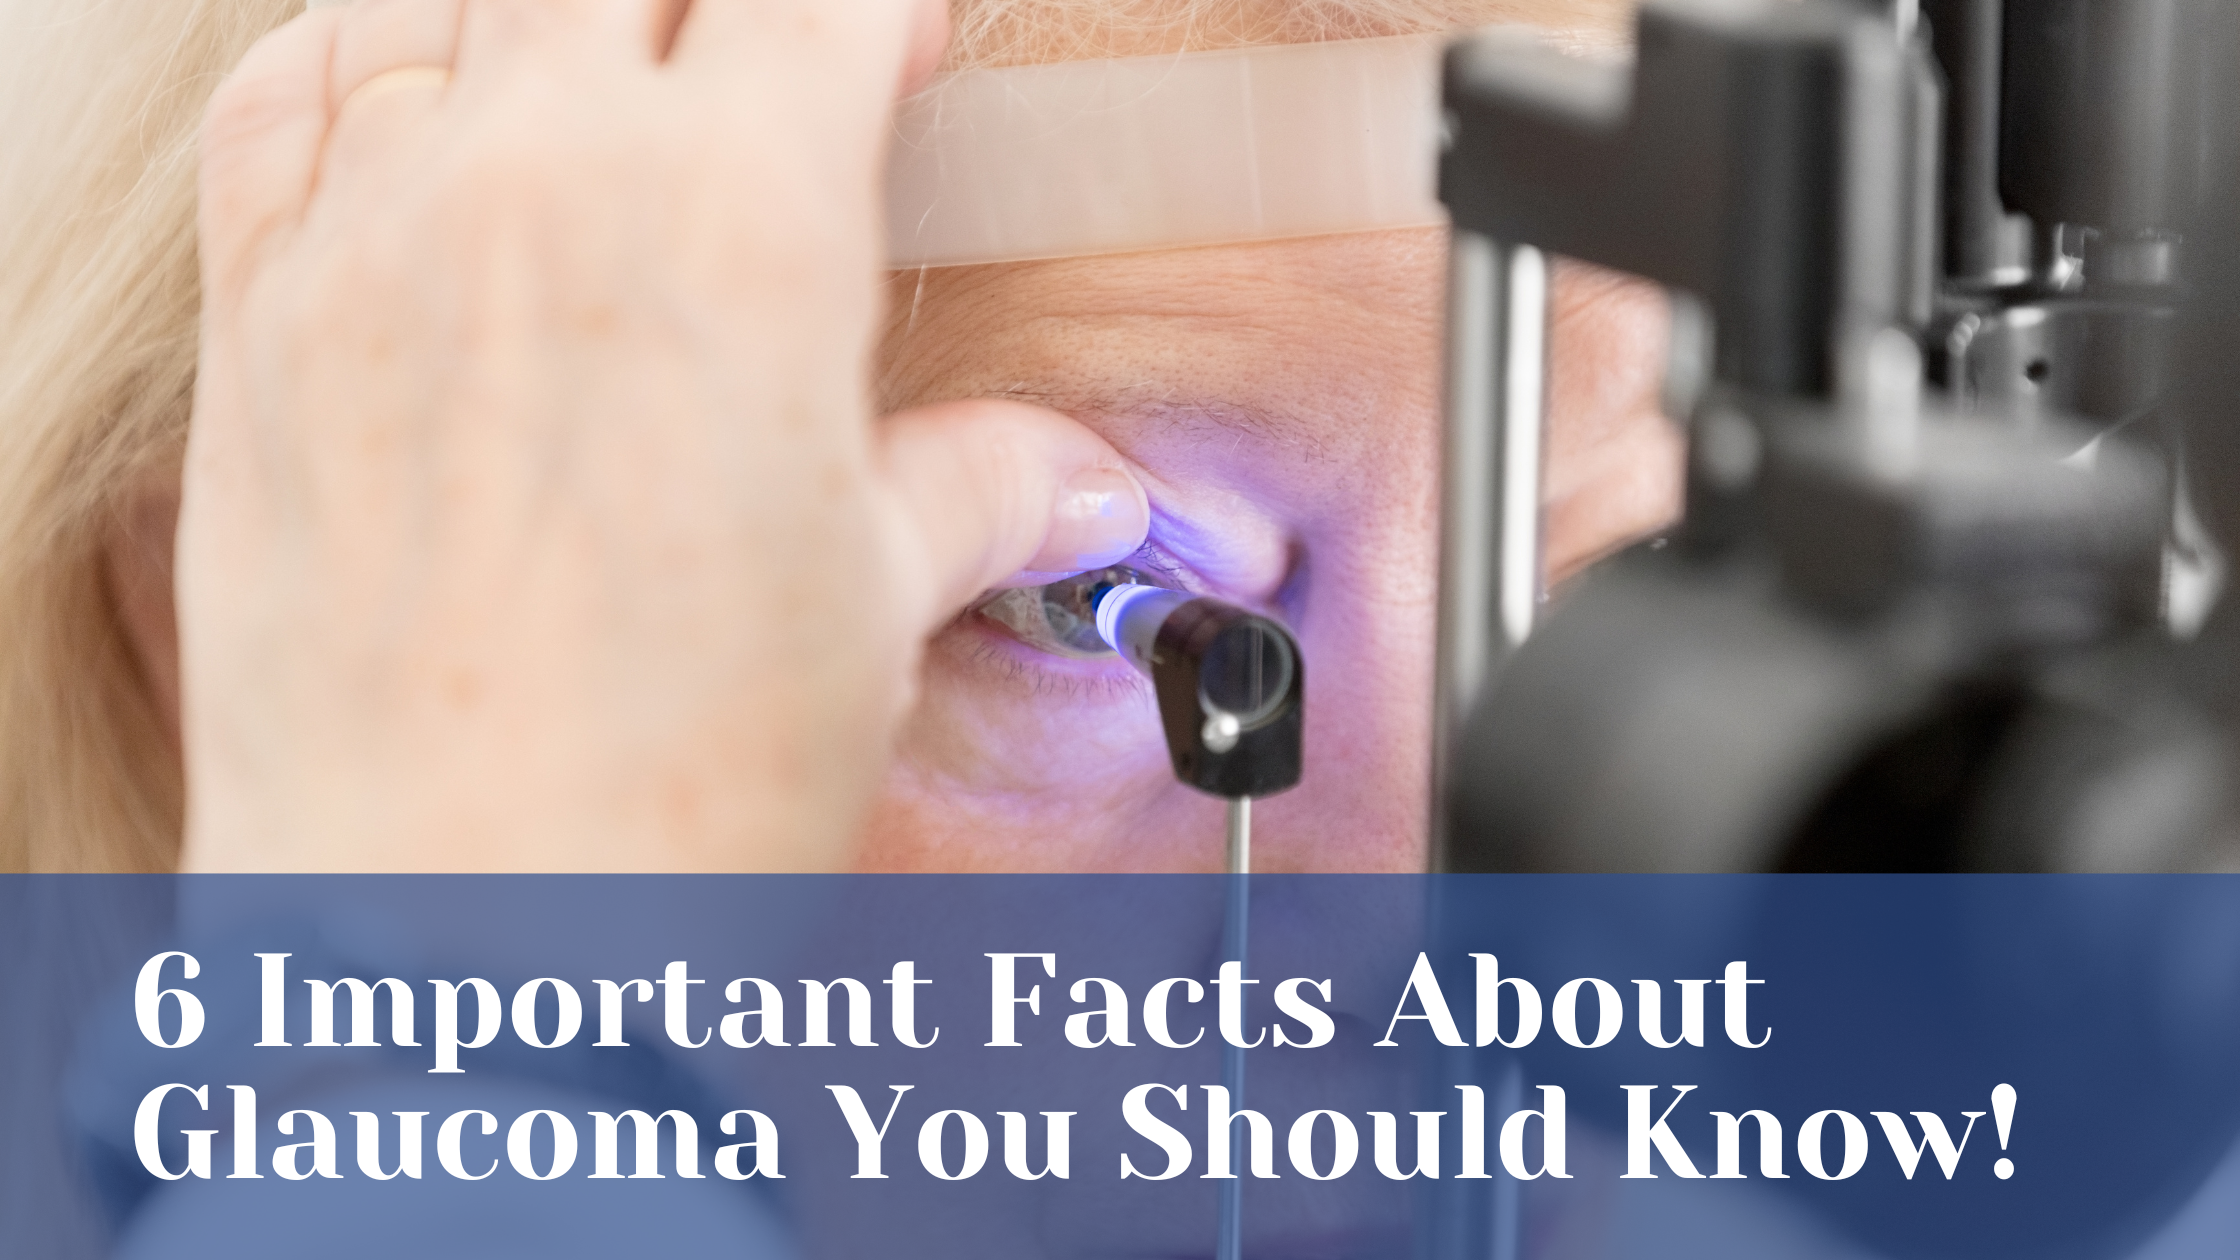 6 Important Facts About Glaucoma You Should Know!